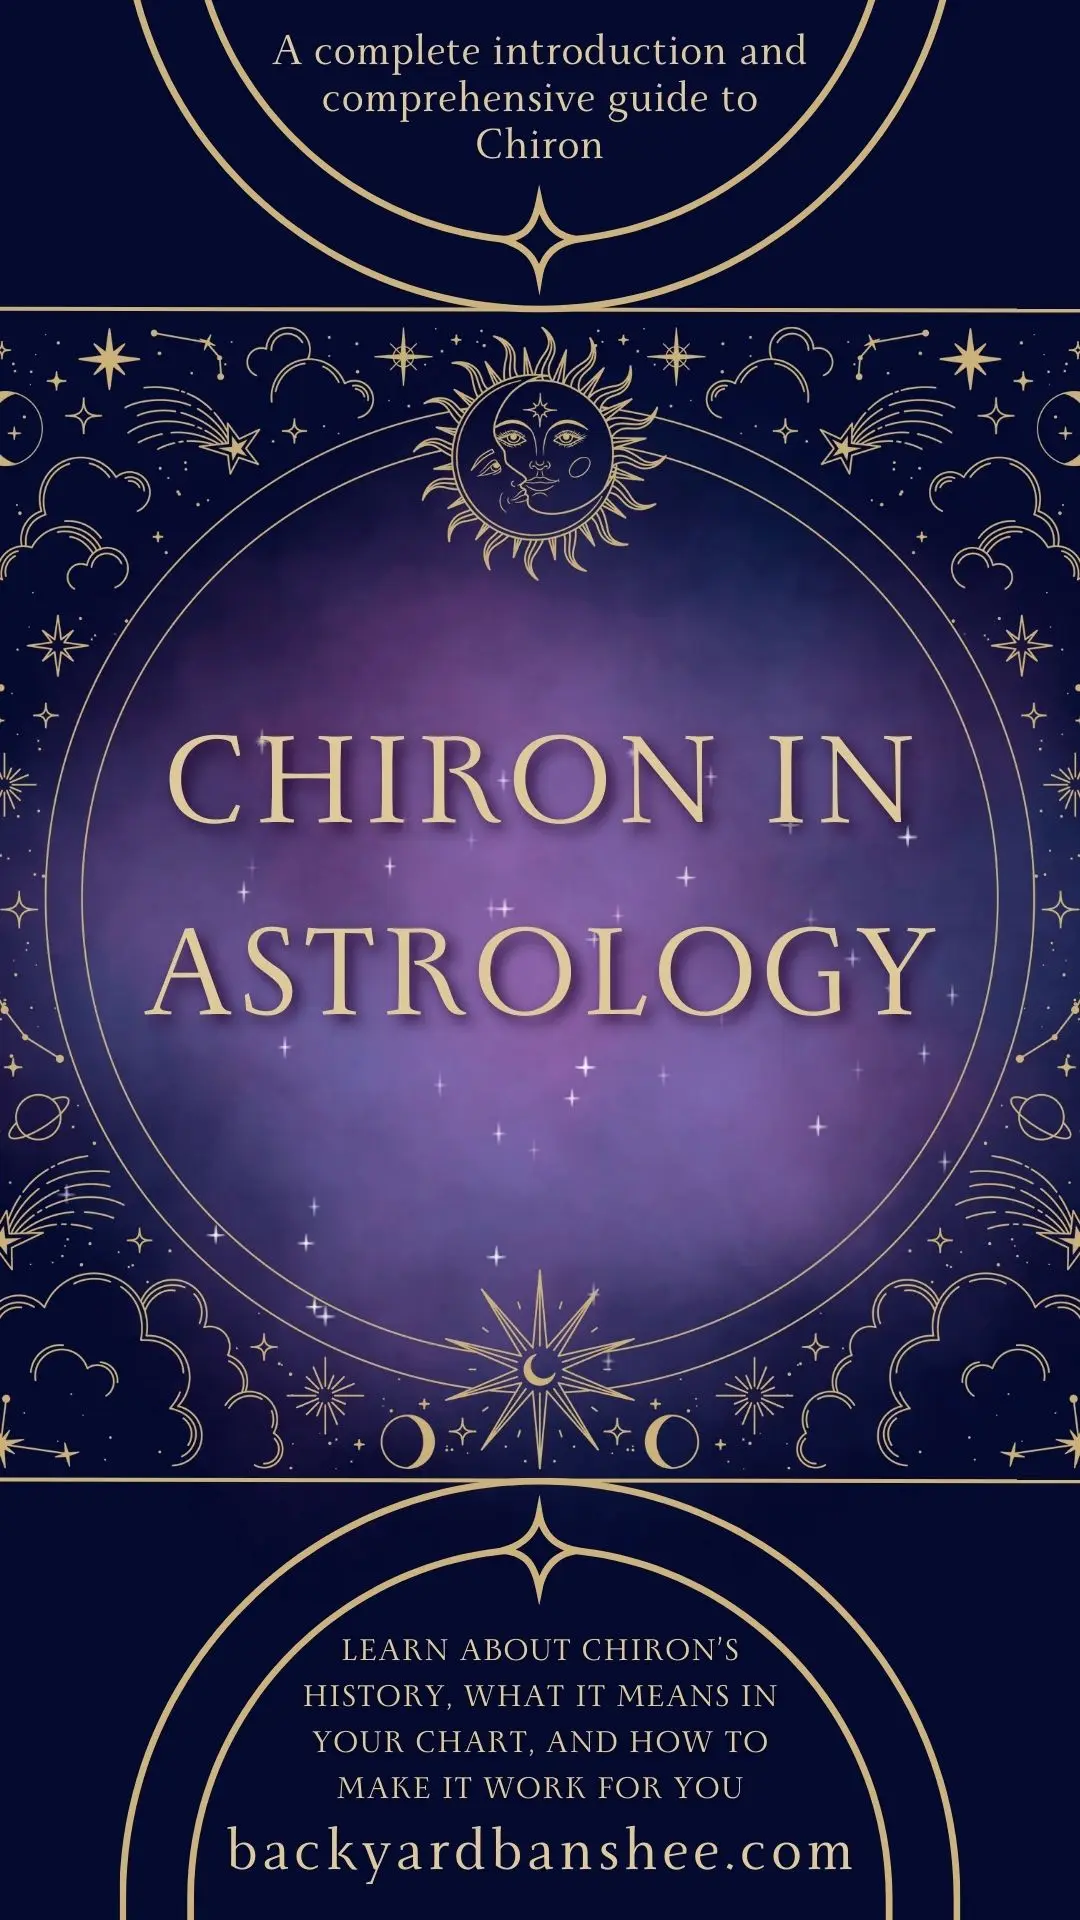 chiron in astrology in depth guide